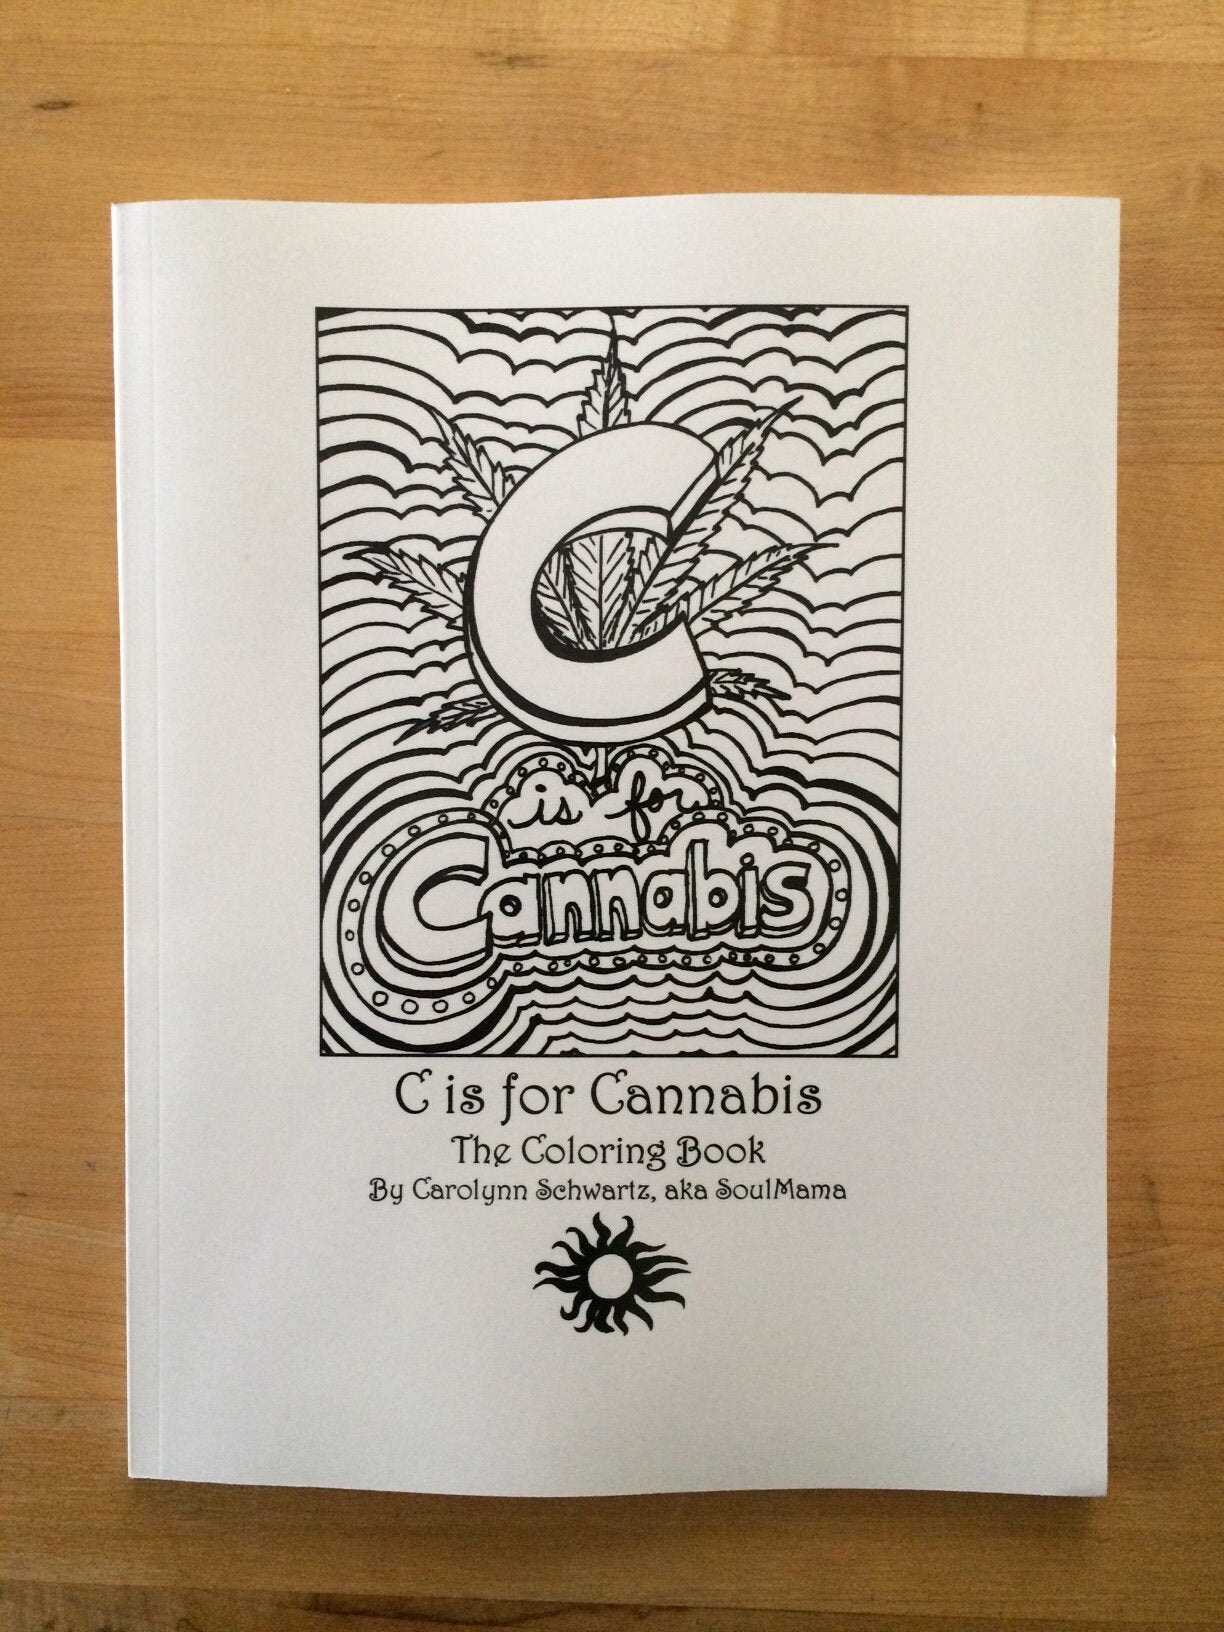 Female-Empowering Cannabis Coloring Books : Stoner Coloring Book